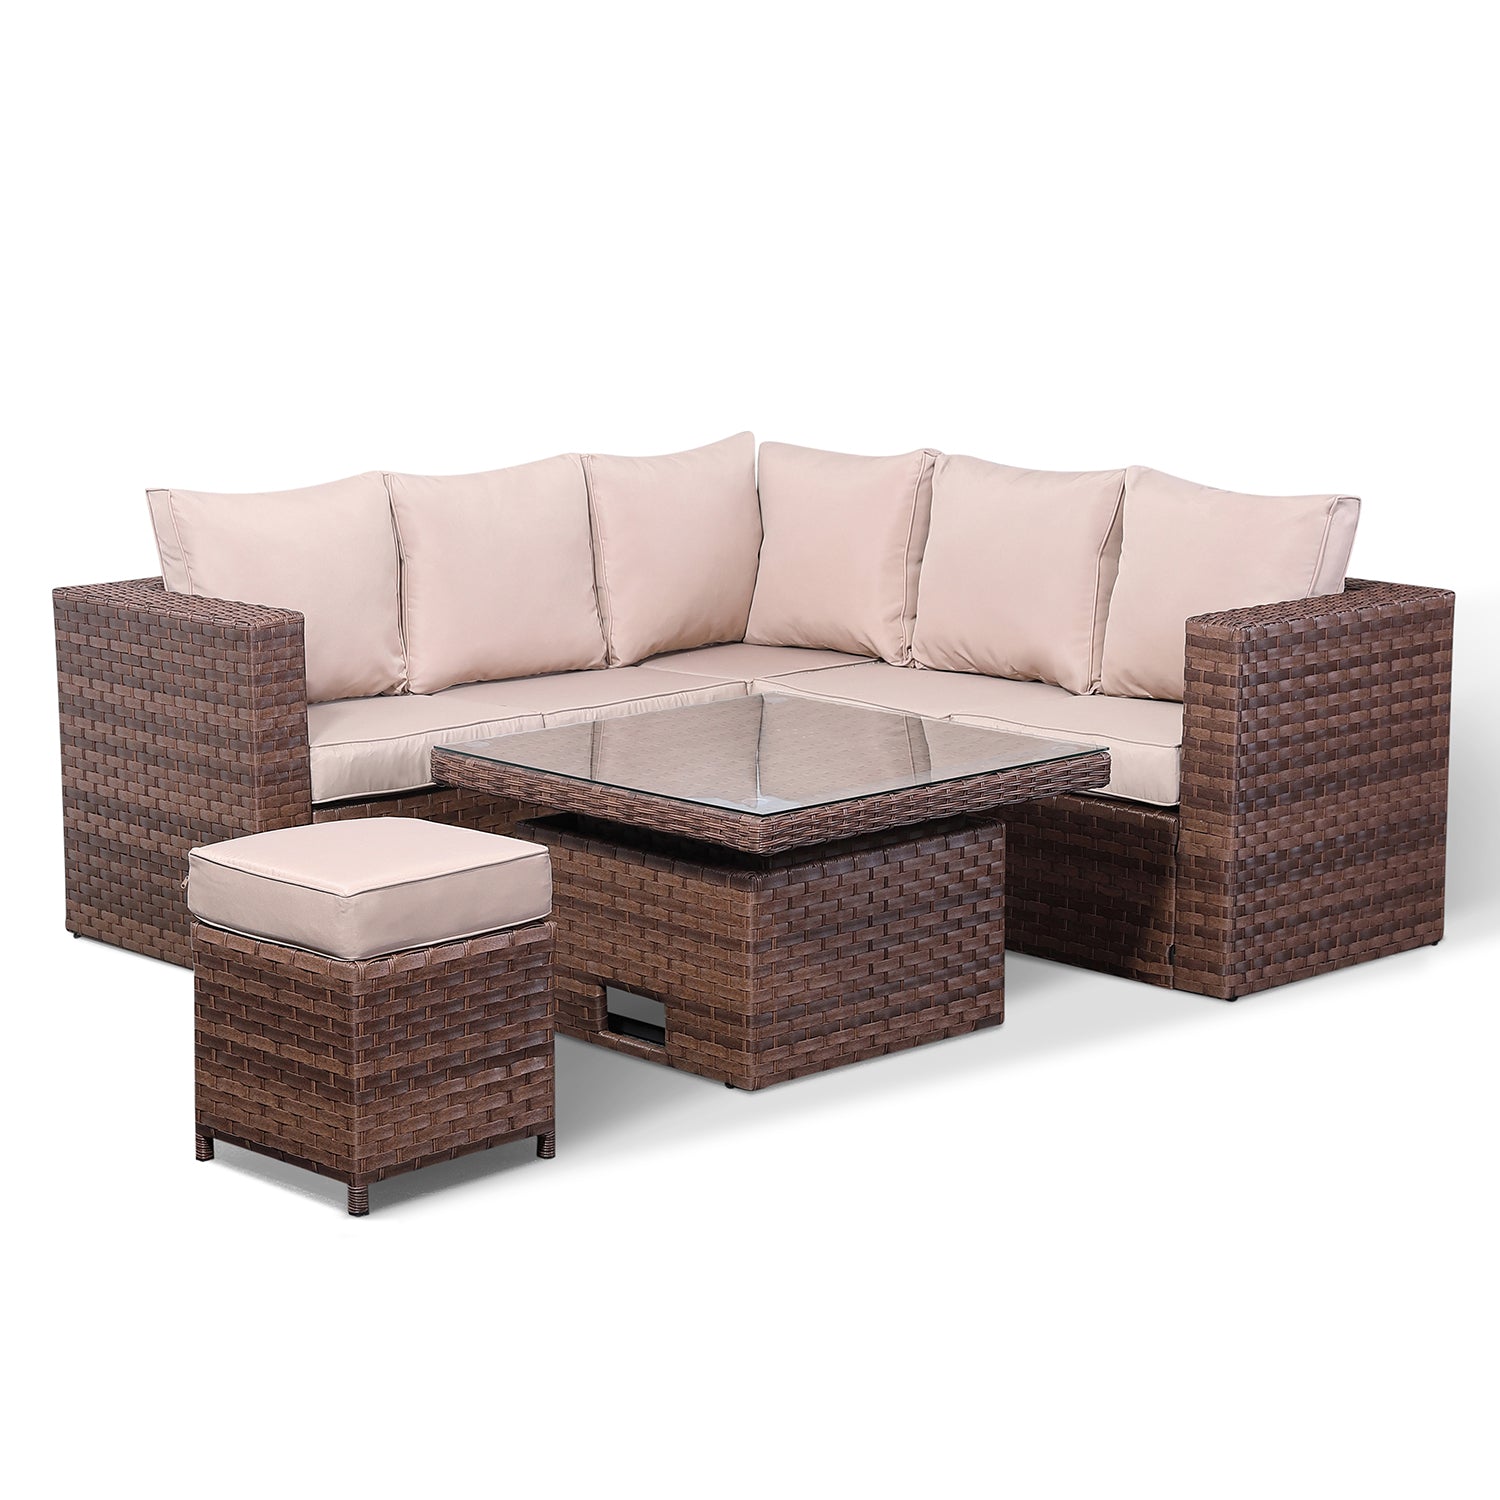 Pansy Range Small Dining Corner Sofa Set with Rising Table in Large Brown